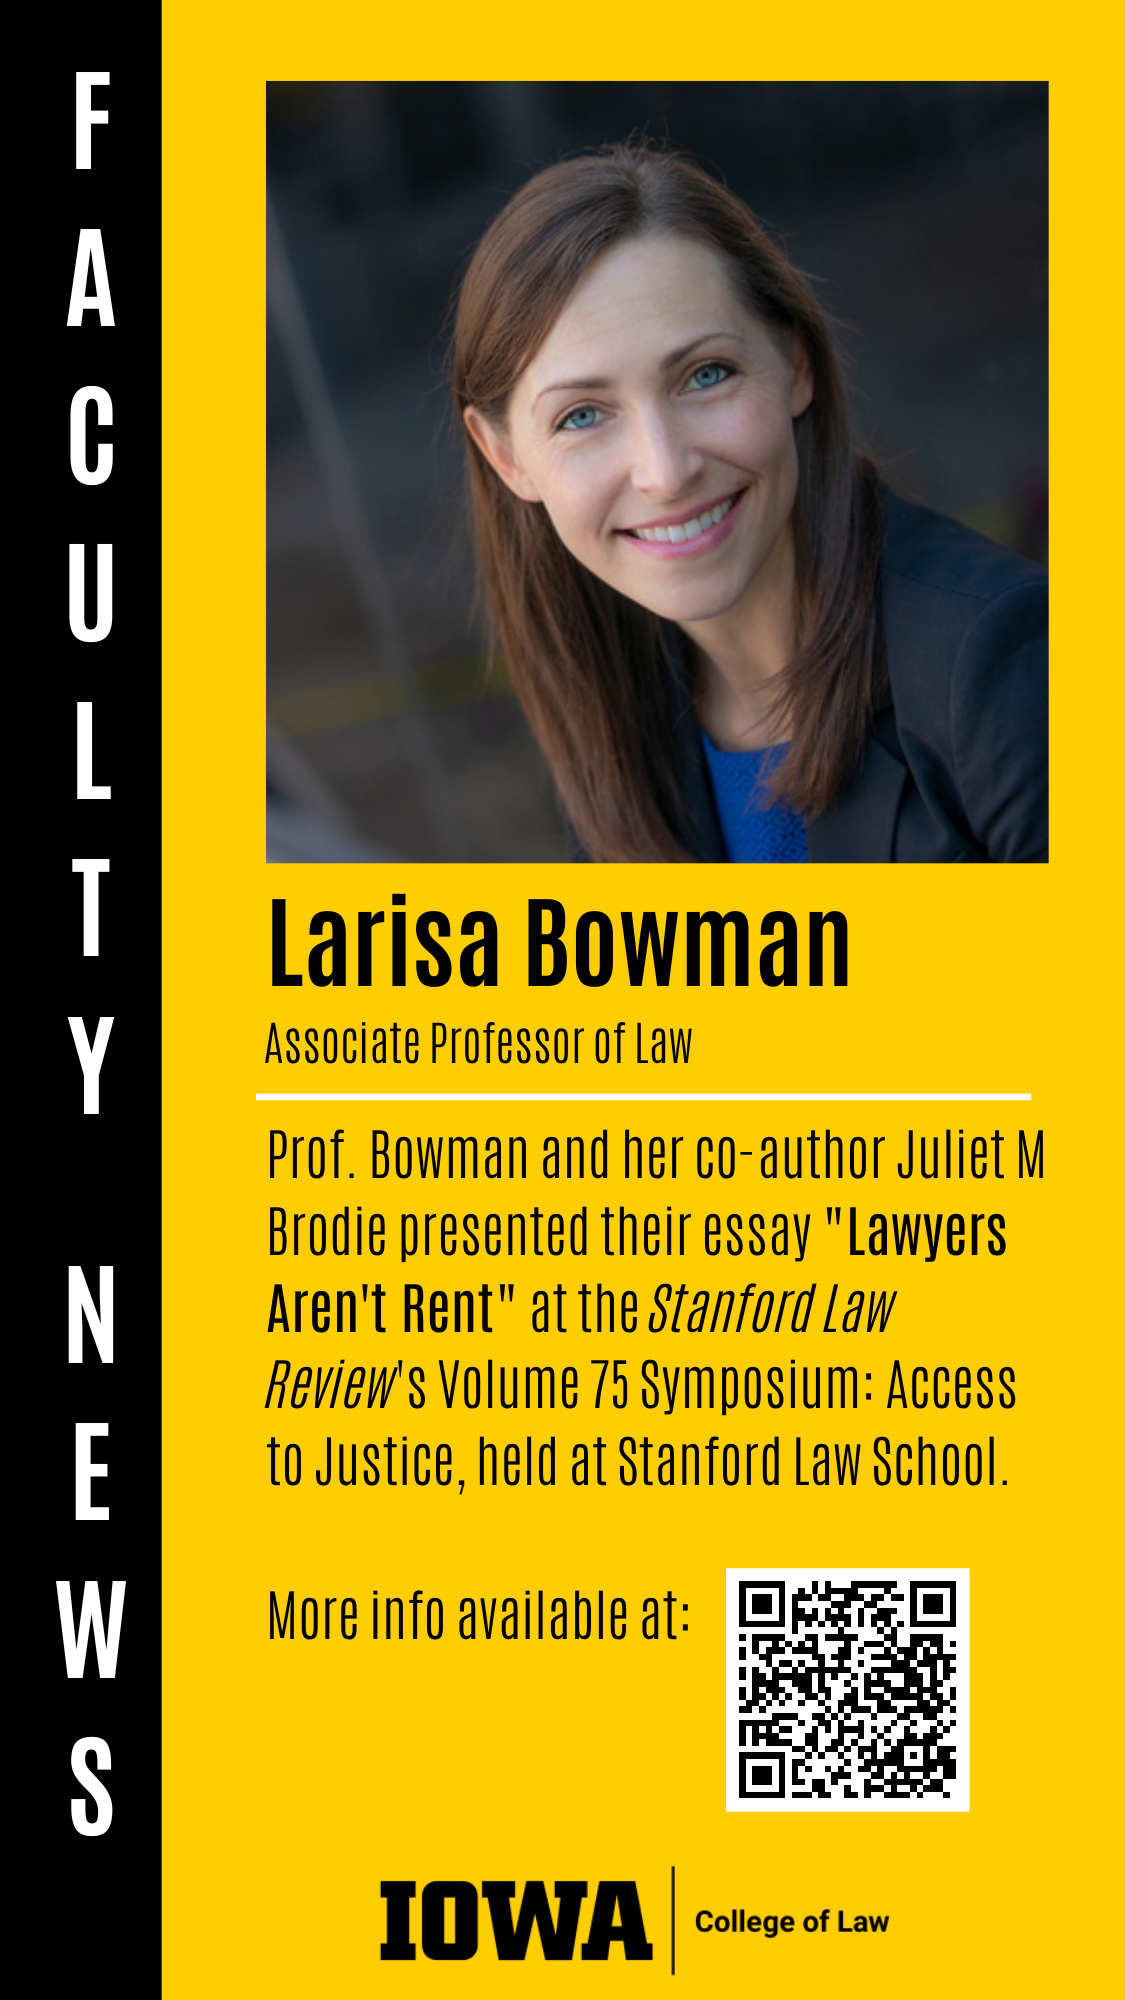 Associate Professor of Law Prof. Bowman and her co-author Juliet M Brodie presented their essay "Lawyers Aren't Rent" at the Stanford Law Review's Volume 75 Symposium: Access to Justice, held at Stanford Law School.  More info available at: Larisa Bowman